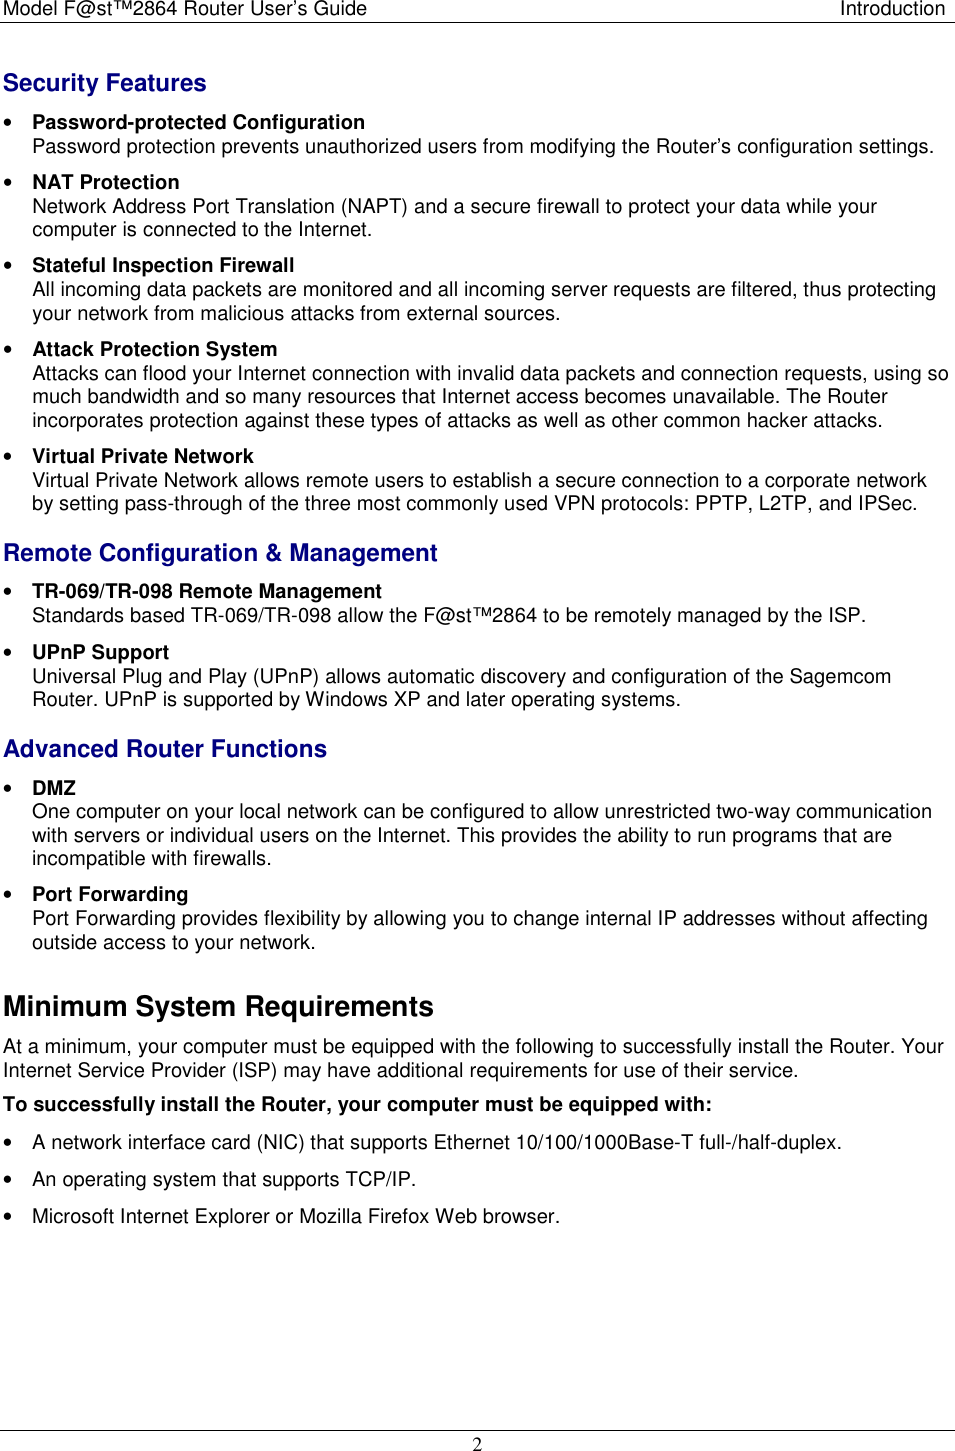 Model F@st™2864 Router User’s Guide  Introduction  2 Security Features • Password-protected Configuration Password protection prevents unauthorized users from modifying the Router’s configuration settings. • NAT Protection Network Address Port Translation (NAPT) and a secure firewall to protect your data while your computer is connected to the Internet. • Stateful Inspection Firewall  All incoming data packets are monitored and all incoming server requests are filtered, thus protecting your network from malicious attacks from external sources. • Attack Protection System  Attacks can flood your Internet connection with invalid data packets and connection requests, using so much bandwidth and so many resources that Internet access becomes unavailable. The Router incorporates protection against these types of attacks as well as other common hacker attacks. • Virtual Private Network  Virtual Private Network allows remote users to establish a secure connection to a corporate network by setting pass-through of the three most commonly used VPN protocols: PPTP, L2TP, and IPSec. Remote Configuration &amp; Management • TR-069/TR-098 Remote Management  Standards based TR-069/TR-098 allow the F@st™2864 to be remotely managed by the ISP. • UPnP Support  Universal Plug and Play (UPnP) allows automatic discovery and configuration of the Sagemcom Router. UPnP is supported by Windows XP and later operating systems. Advanced Router Functions • DMZ  One computer on your local network can be configured to allow unrestricted two-way communication with servers or individual users on the Internet. This provides the ability to run programs that are incompatible with firewalls. • Port Forwarding Port Forwarding provides flexibility by allowing you to change internal IP addresses without affecting outside access to your network. Minimum System Requirements At a minimum, your computer must be equipped with the following to successfully install the Router. Your Internet Service Provider (ISP) may have additional requirements for use of their service. To successfully install the Router, your computer must be equipped with:   •  A network interface card (NIC) that supports Ethernet 10/100/1000Base-T full-/half-duplex. •  An operating system that supports TCP/IP. •  Microsoft Internet Explorer or Mozilla Firefox Web browser.  